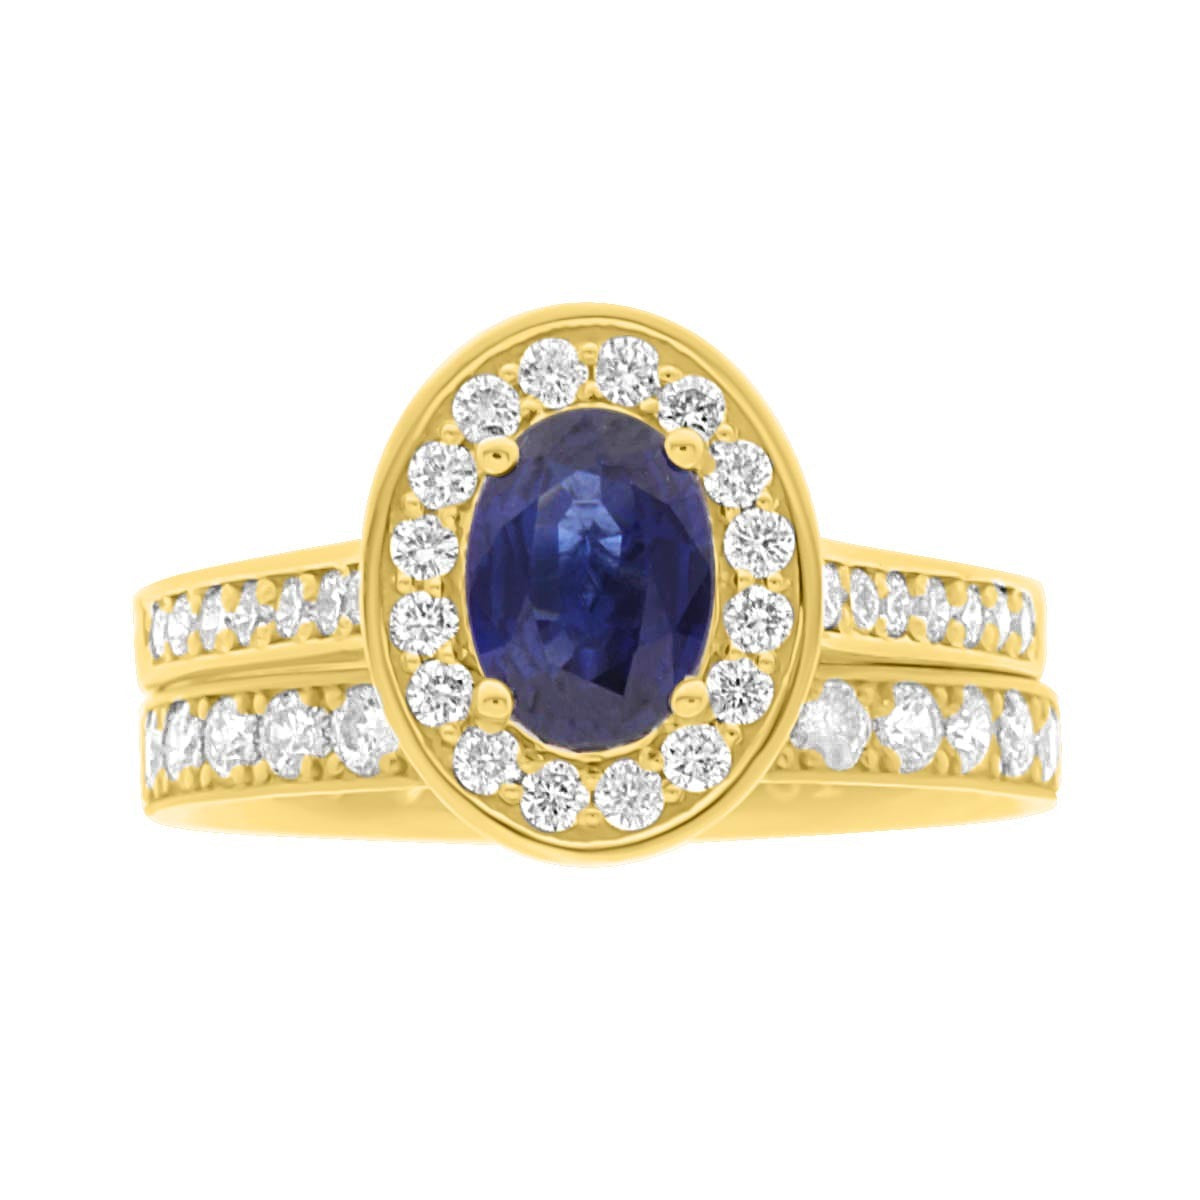 Sapphire Halo Engagement Ring in yellow gold with a matching yellow gold and diamond wedding ring